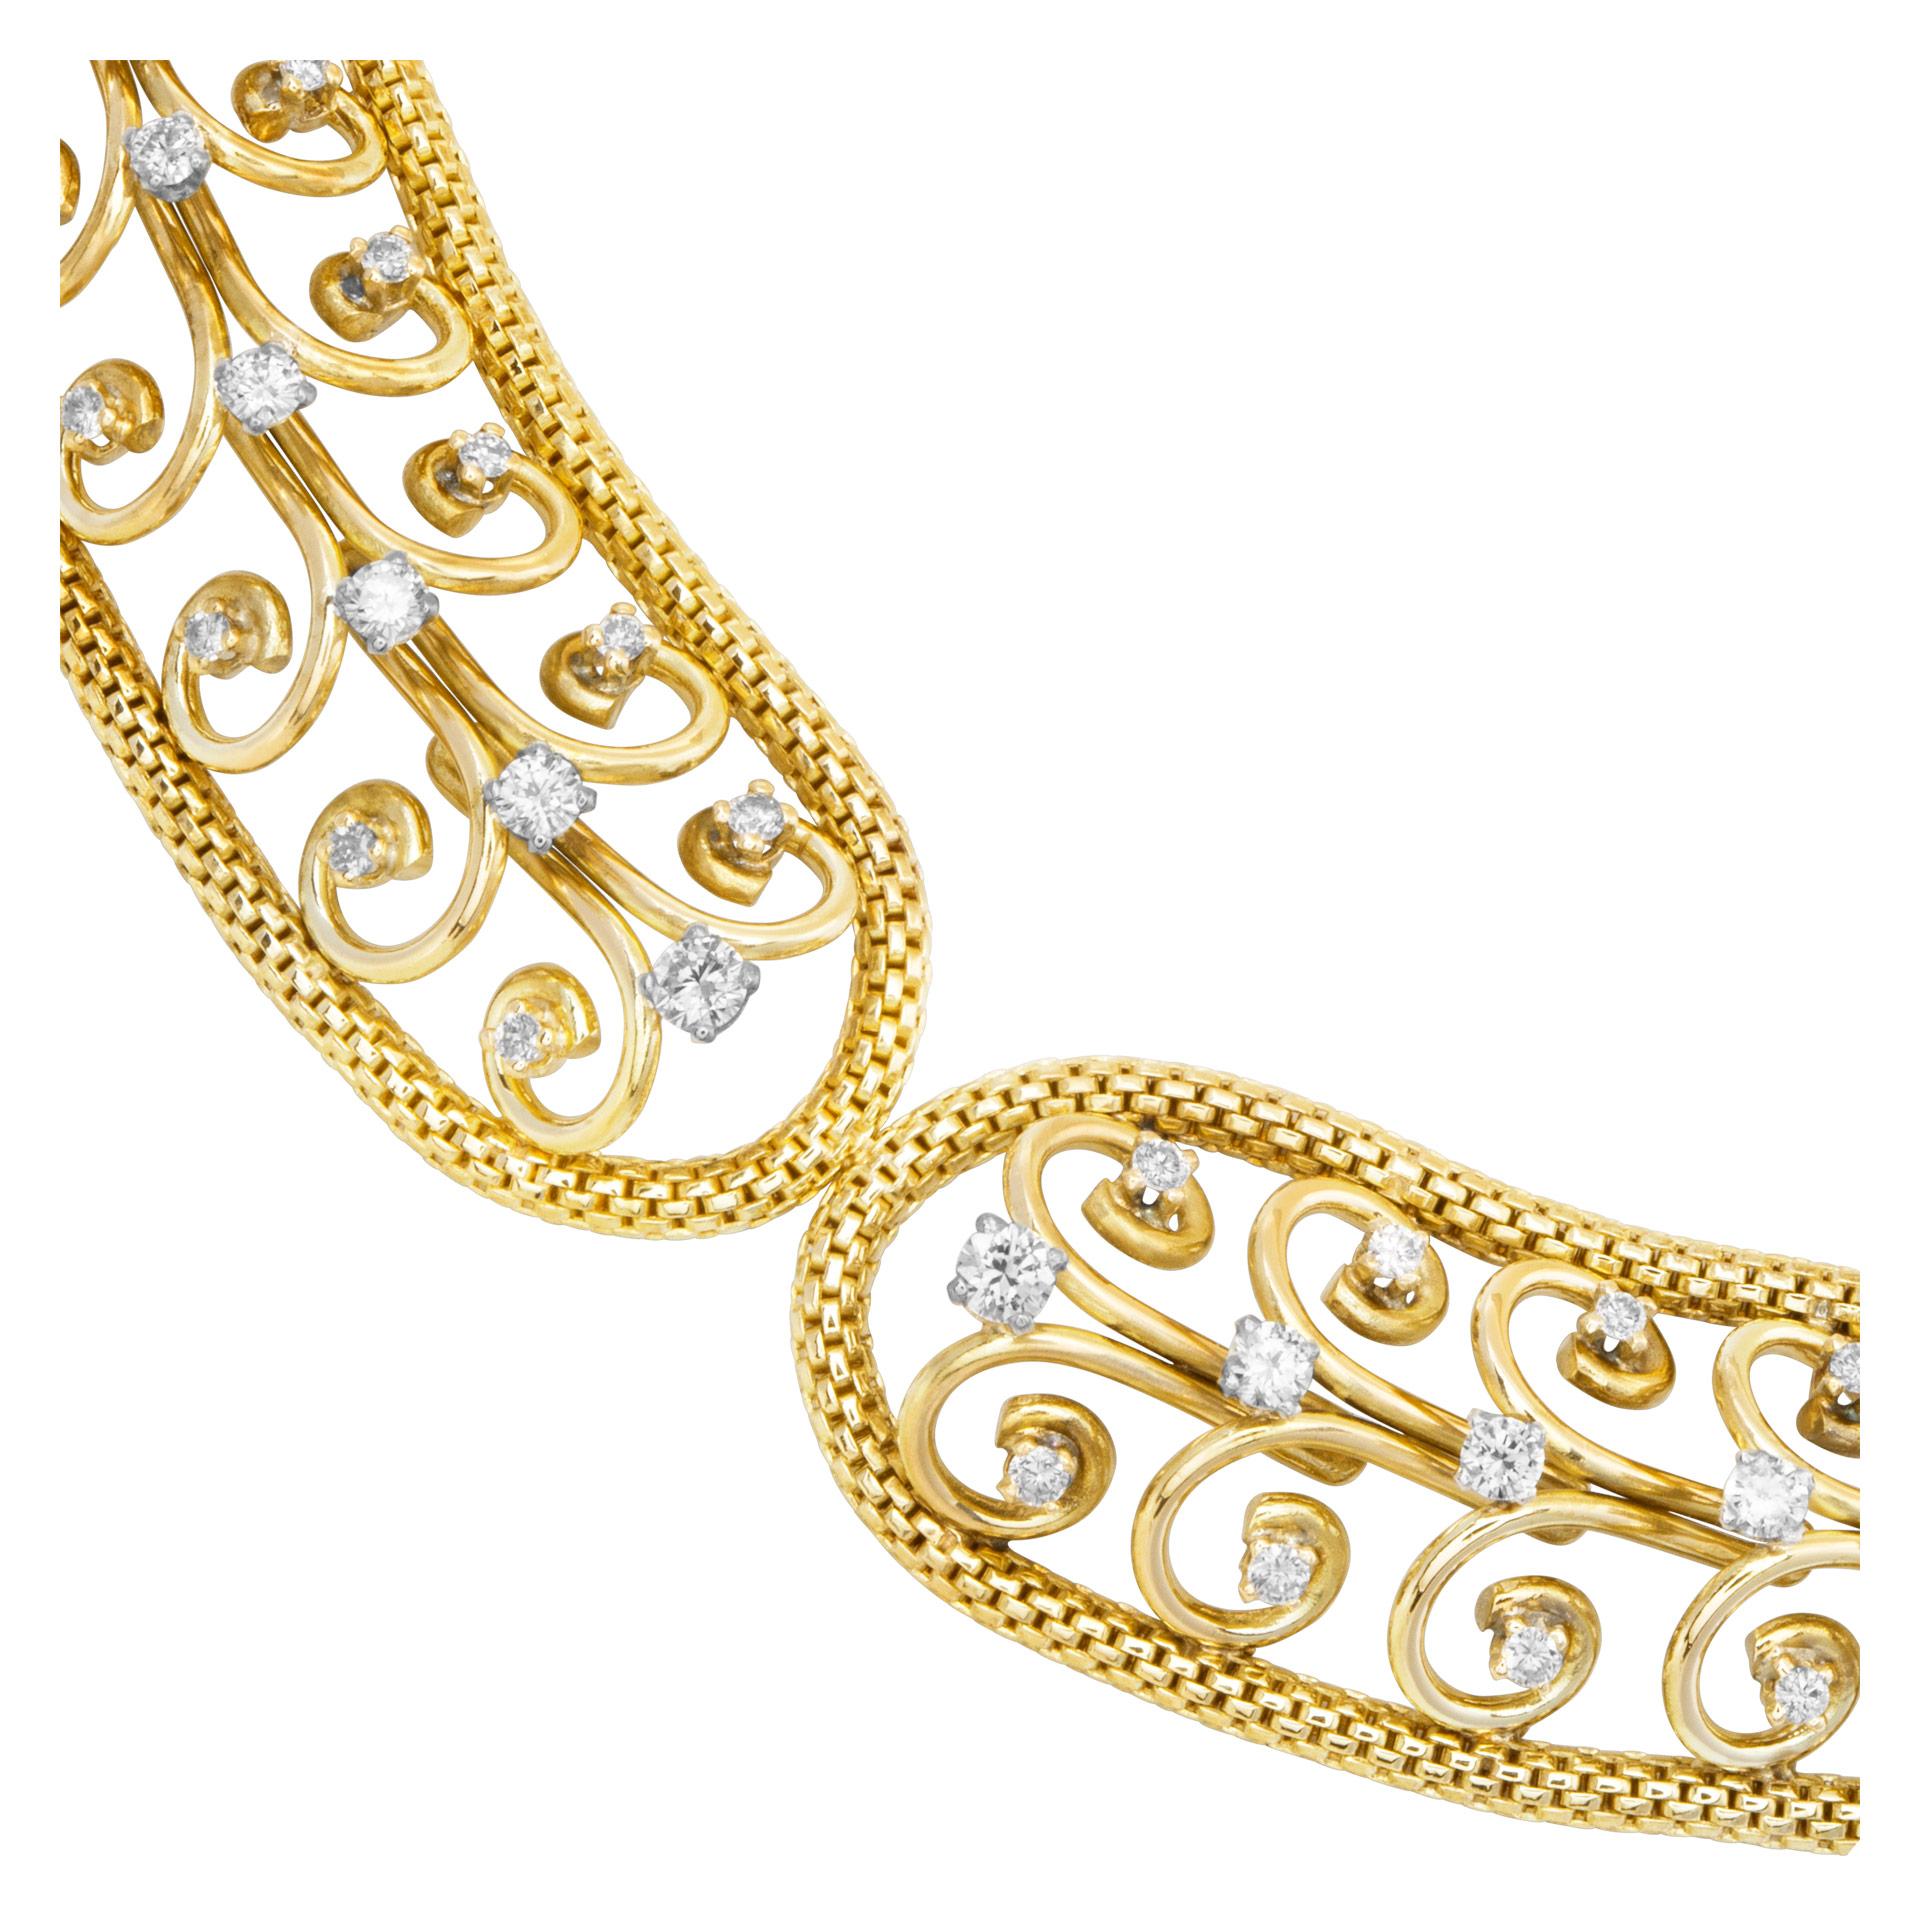 Swirl link choker necklace with over 1 carat in G-H color, VS clarity diamond accents set in 18k yellow gold. 14.5